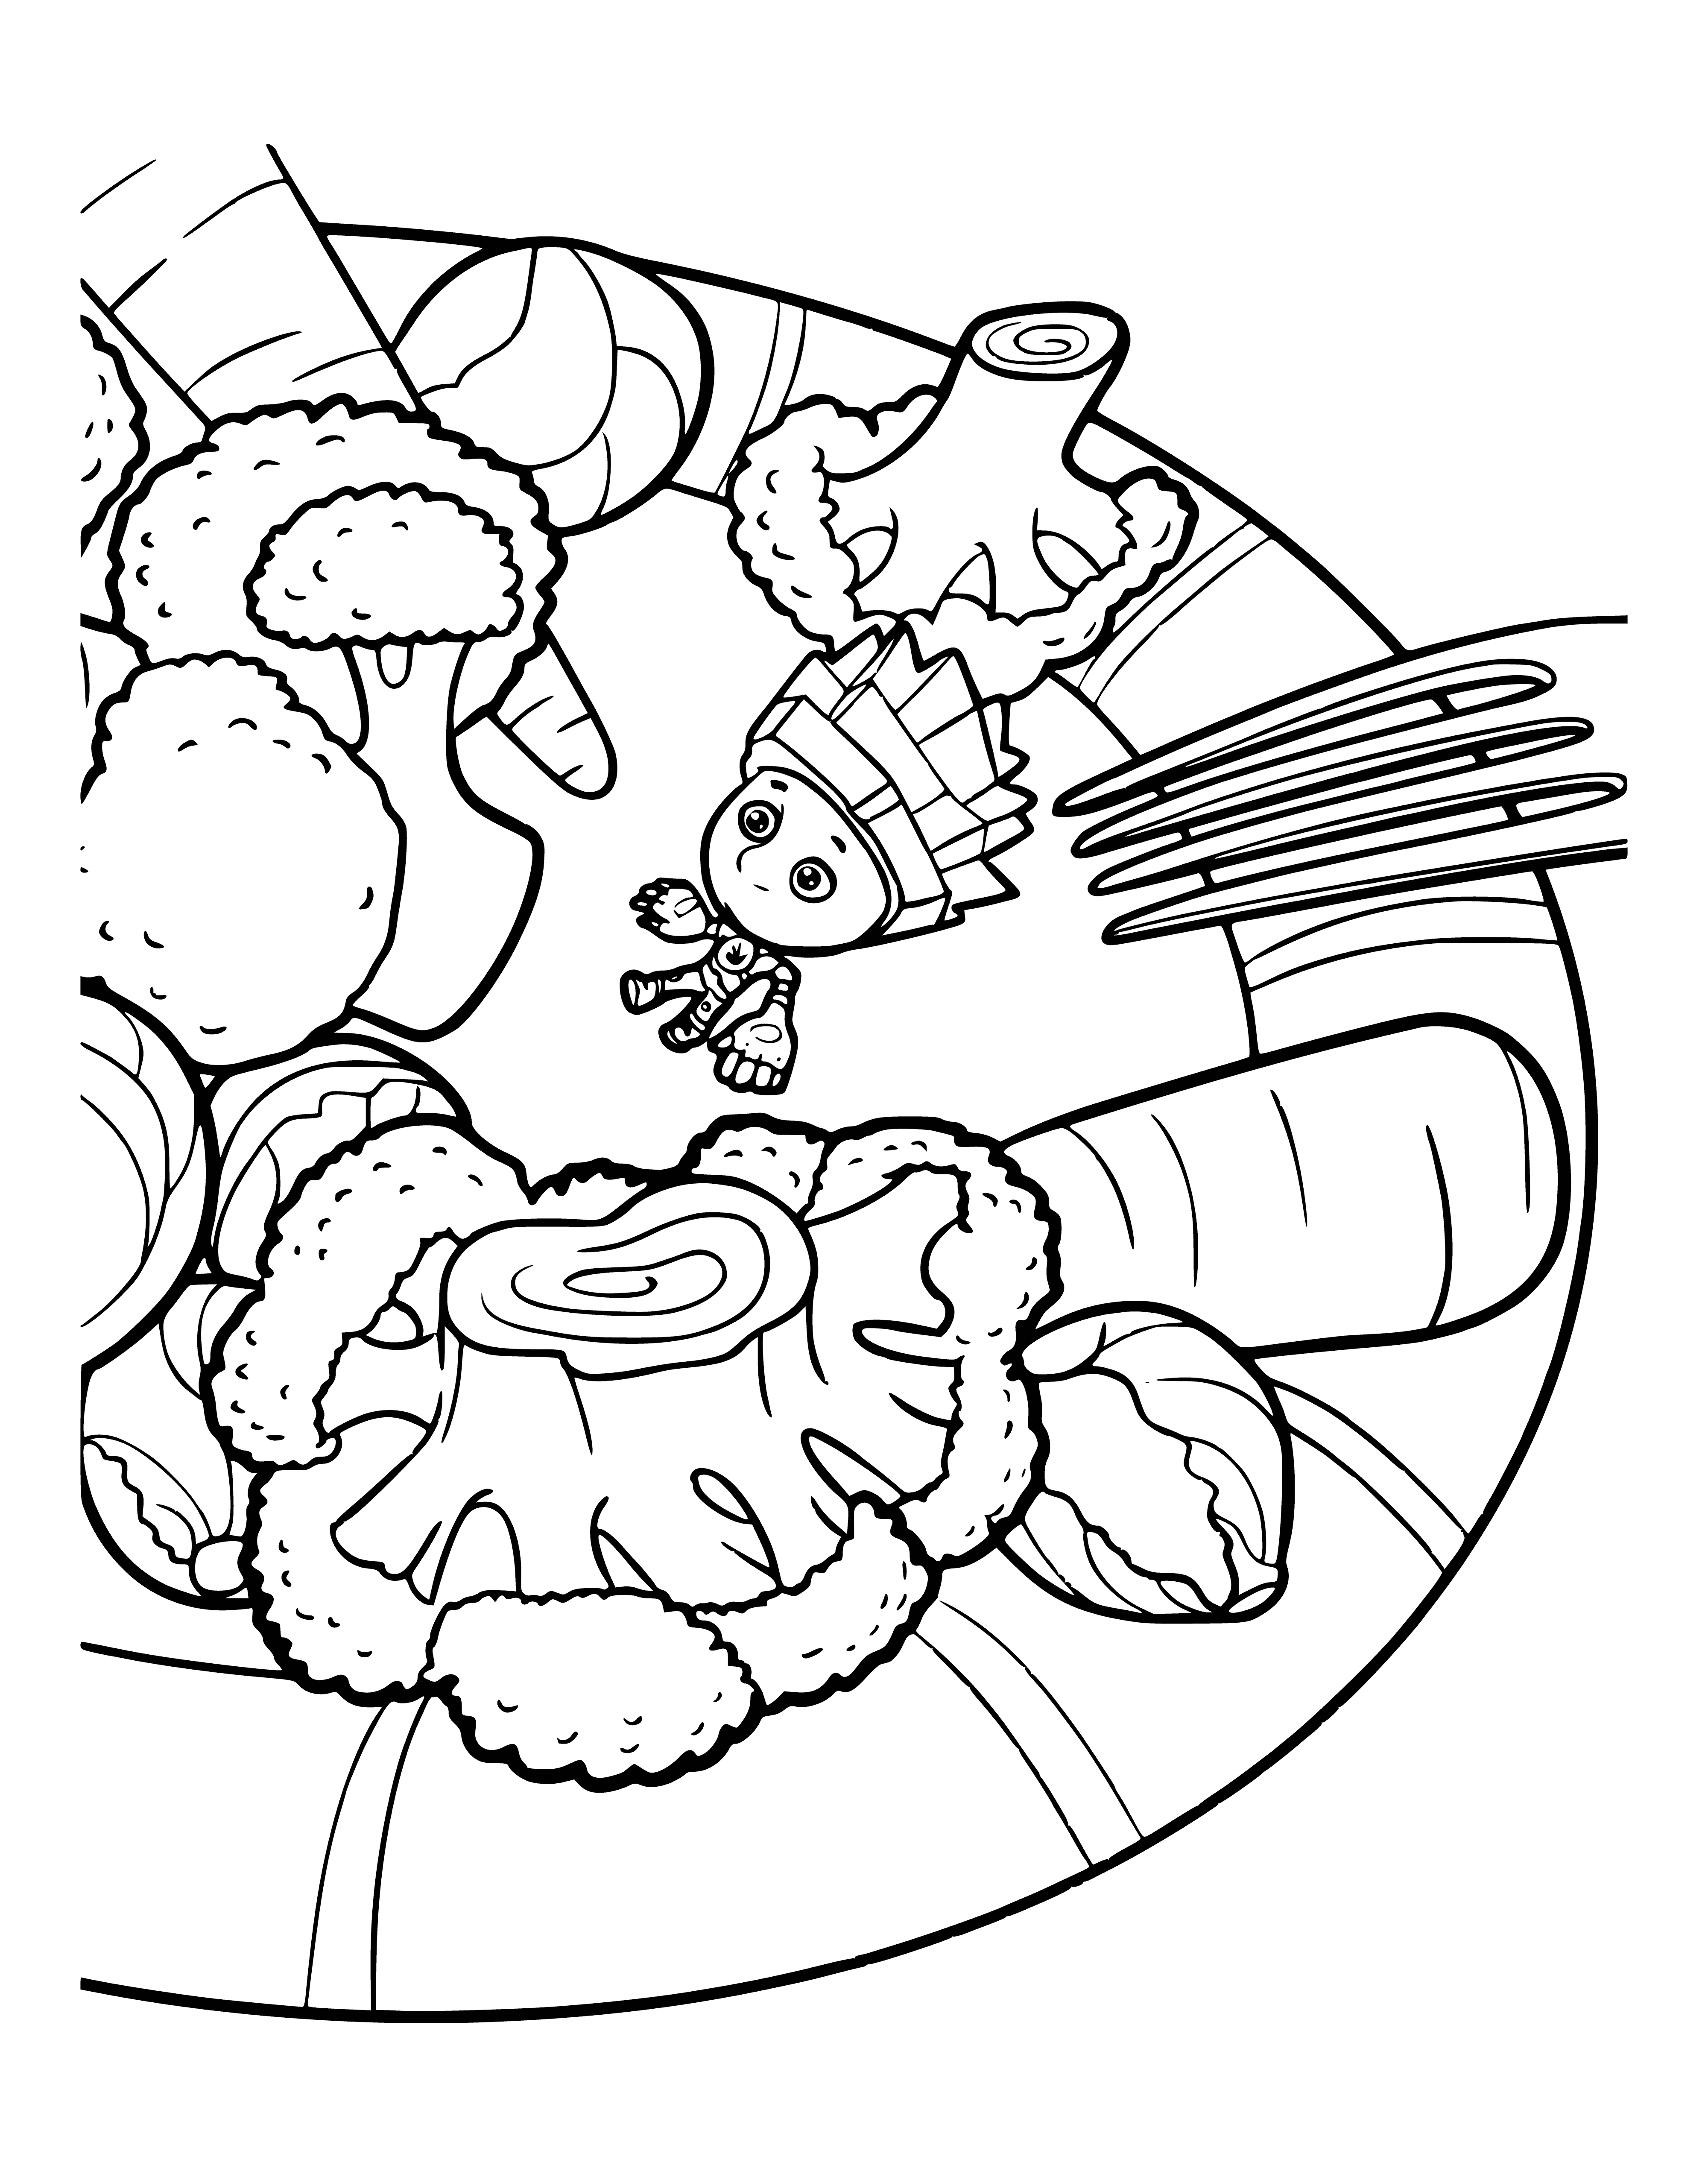 coloring page: 3 fixies on a plate, arms crossed, frowning & "Zero" written on chests.